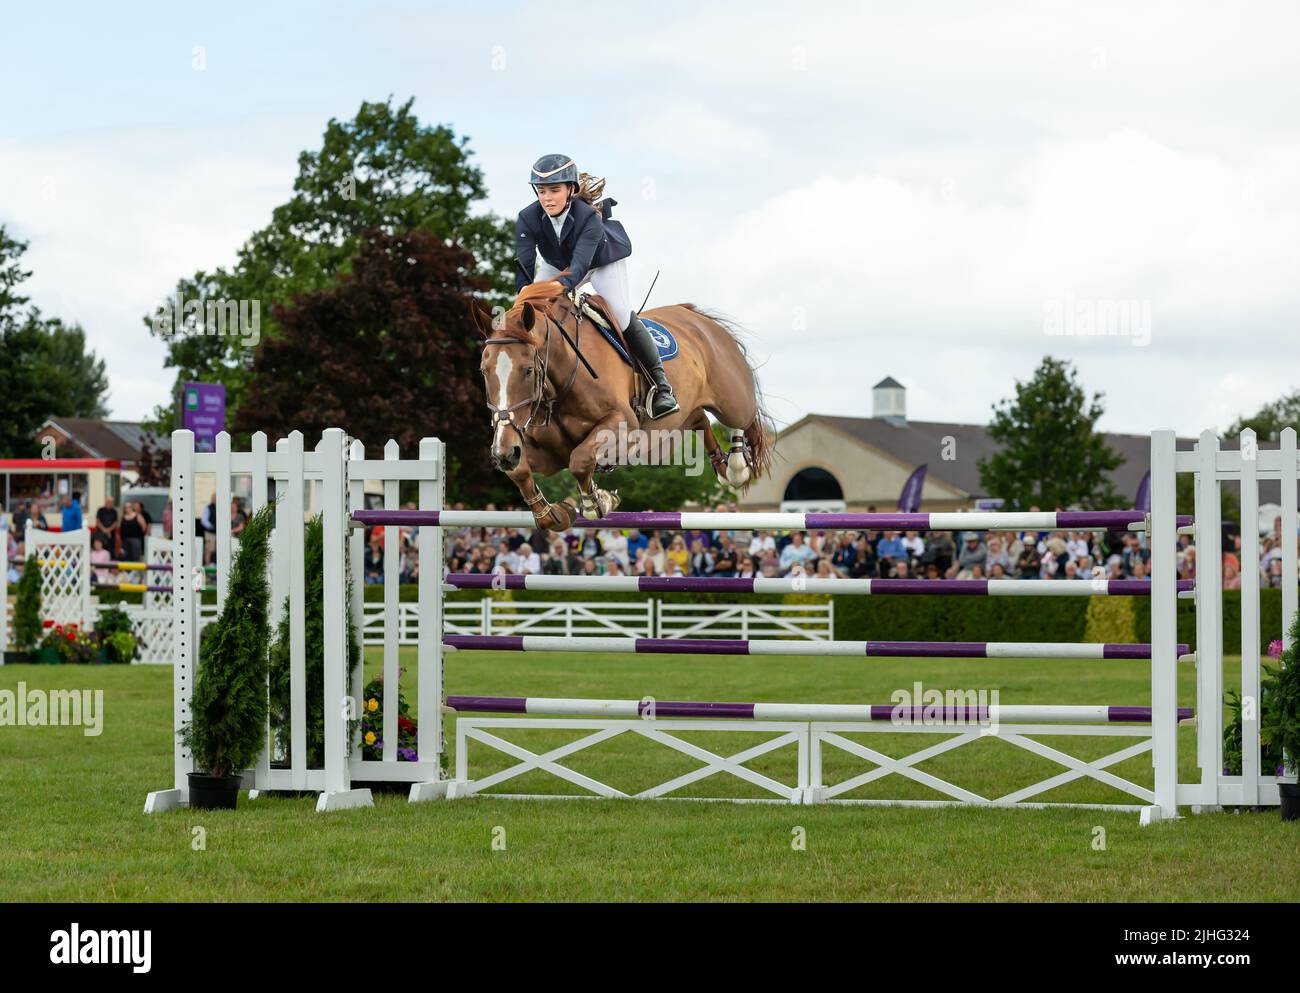 Great Yorkshire Show, Harrogate, UK. July 15, 2022. Young female rider and her horse jumping clear over the poles, main ring show jumping course at th Stock Photo